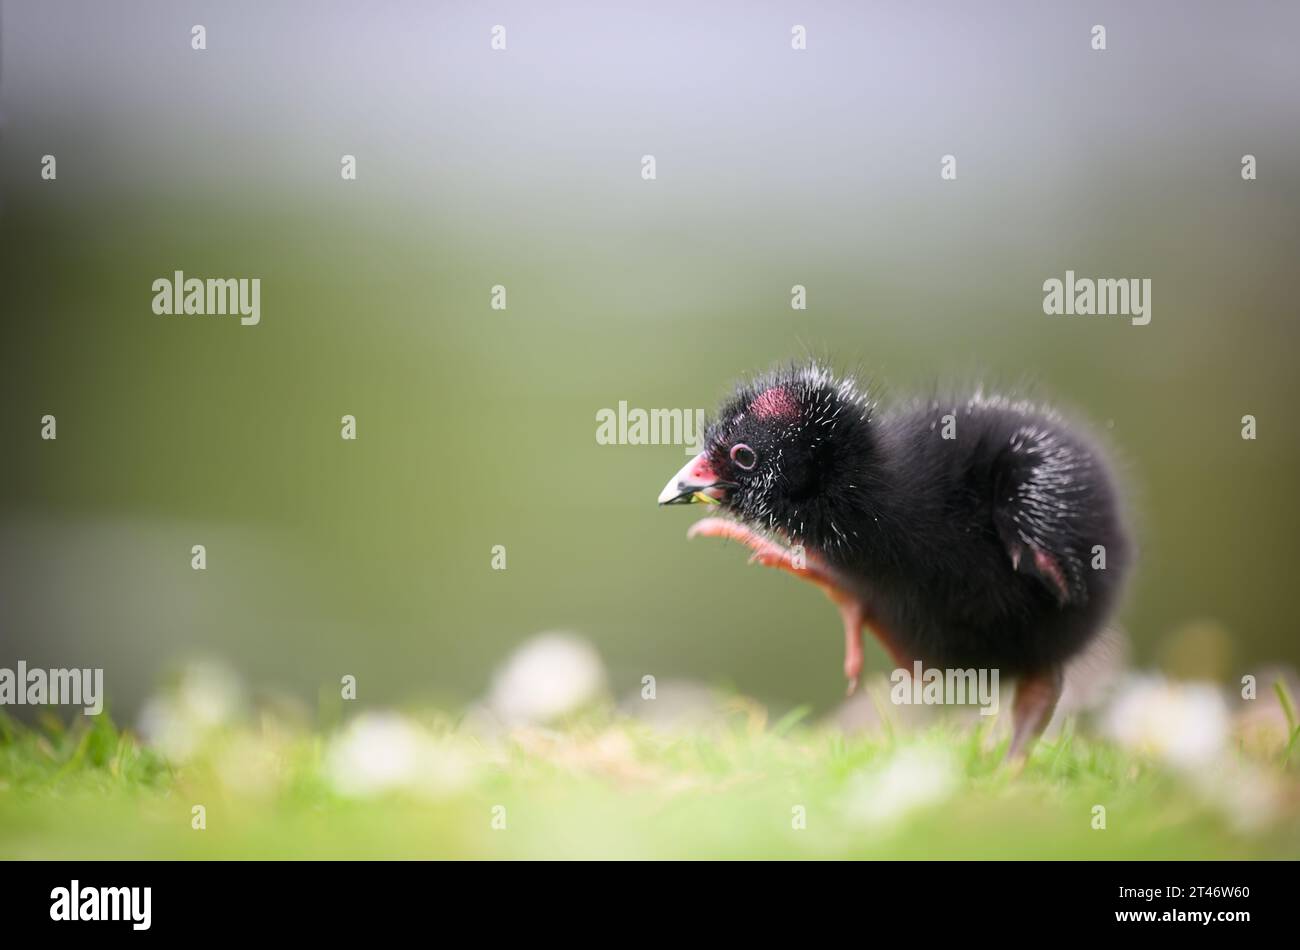 Pukeko chick scratching itself with one leg up. Nature green background. Auckland. Stock Photo